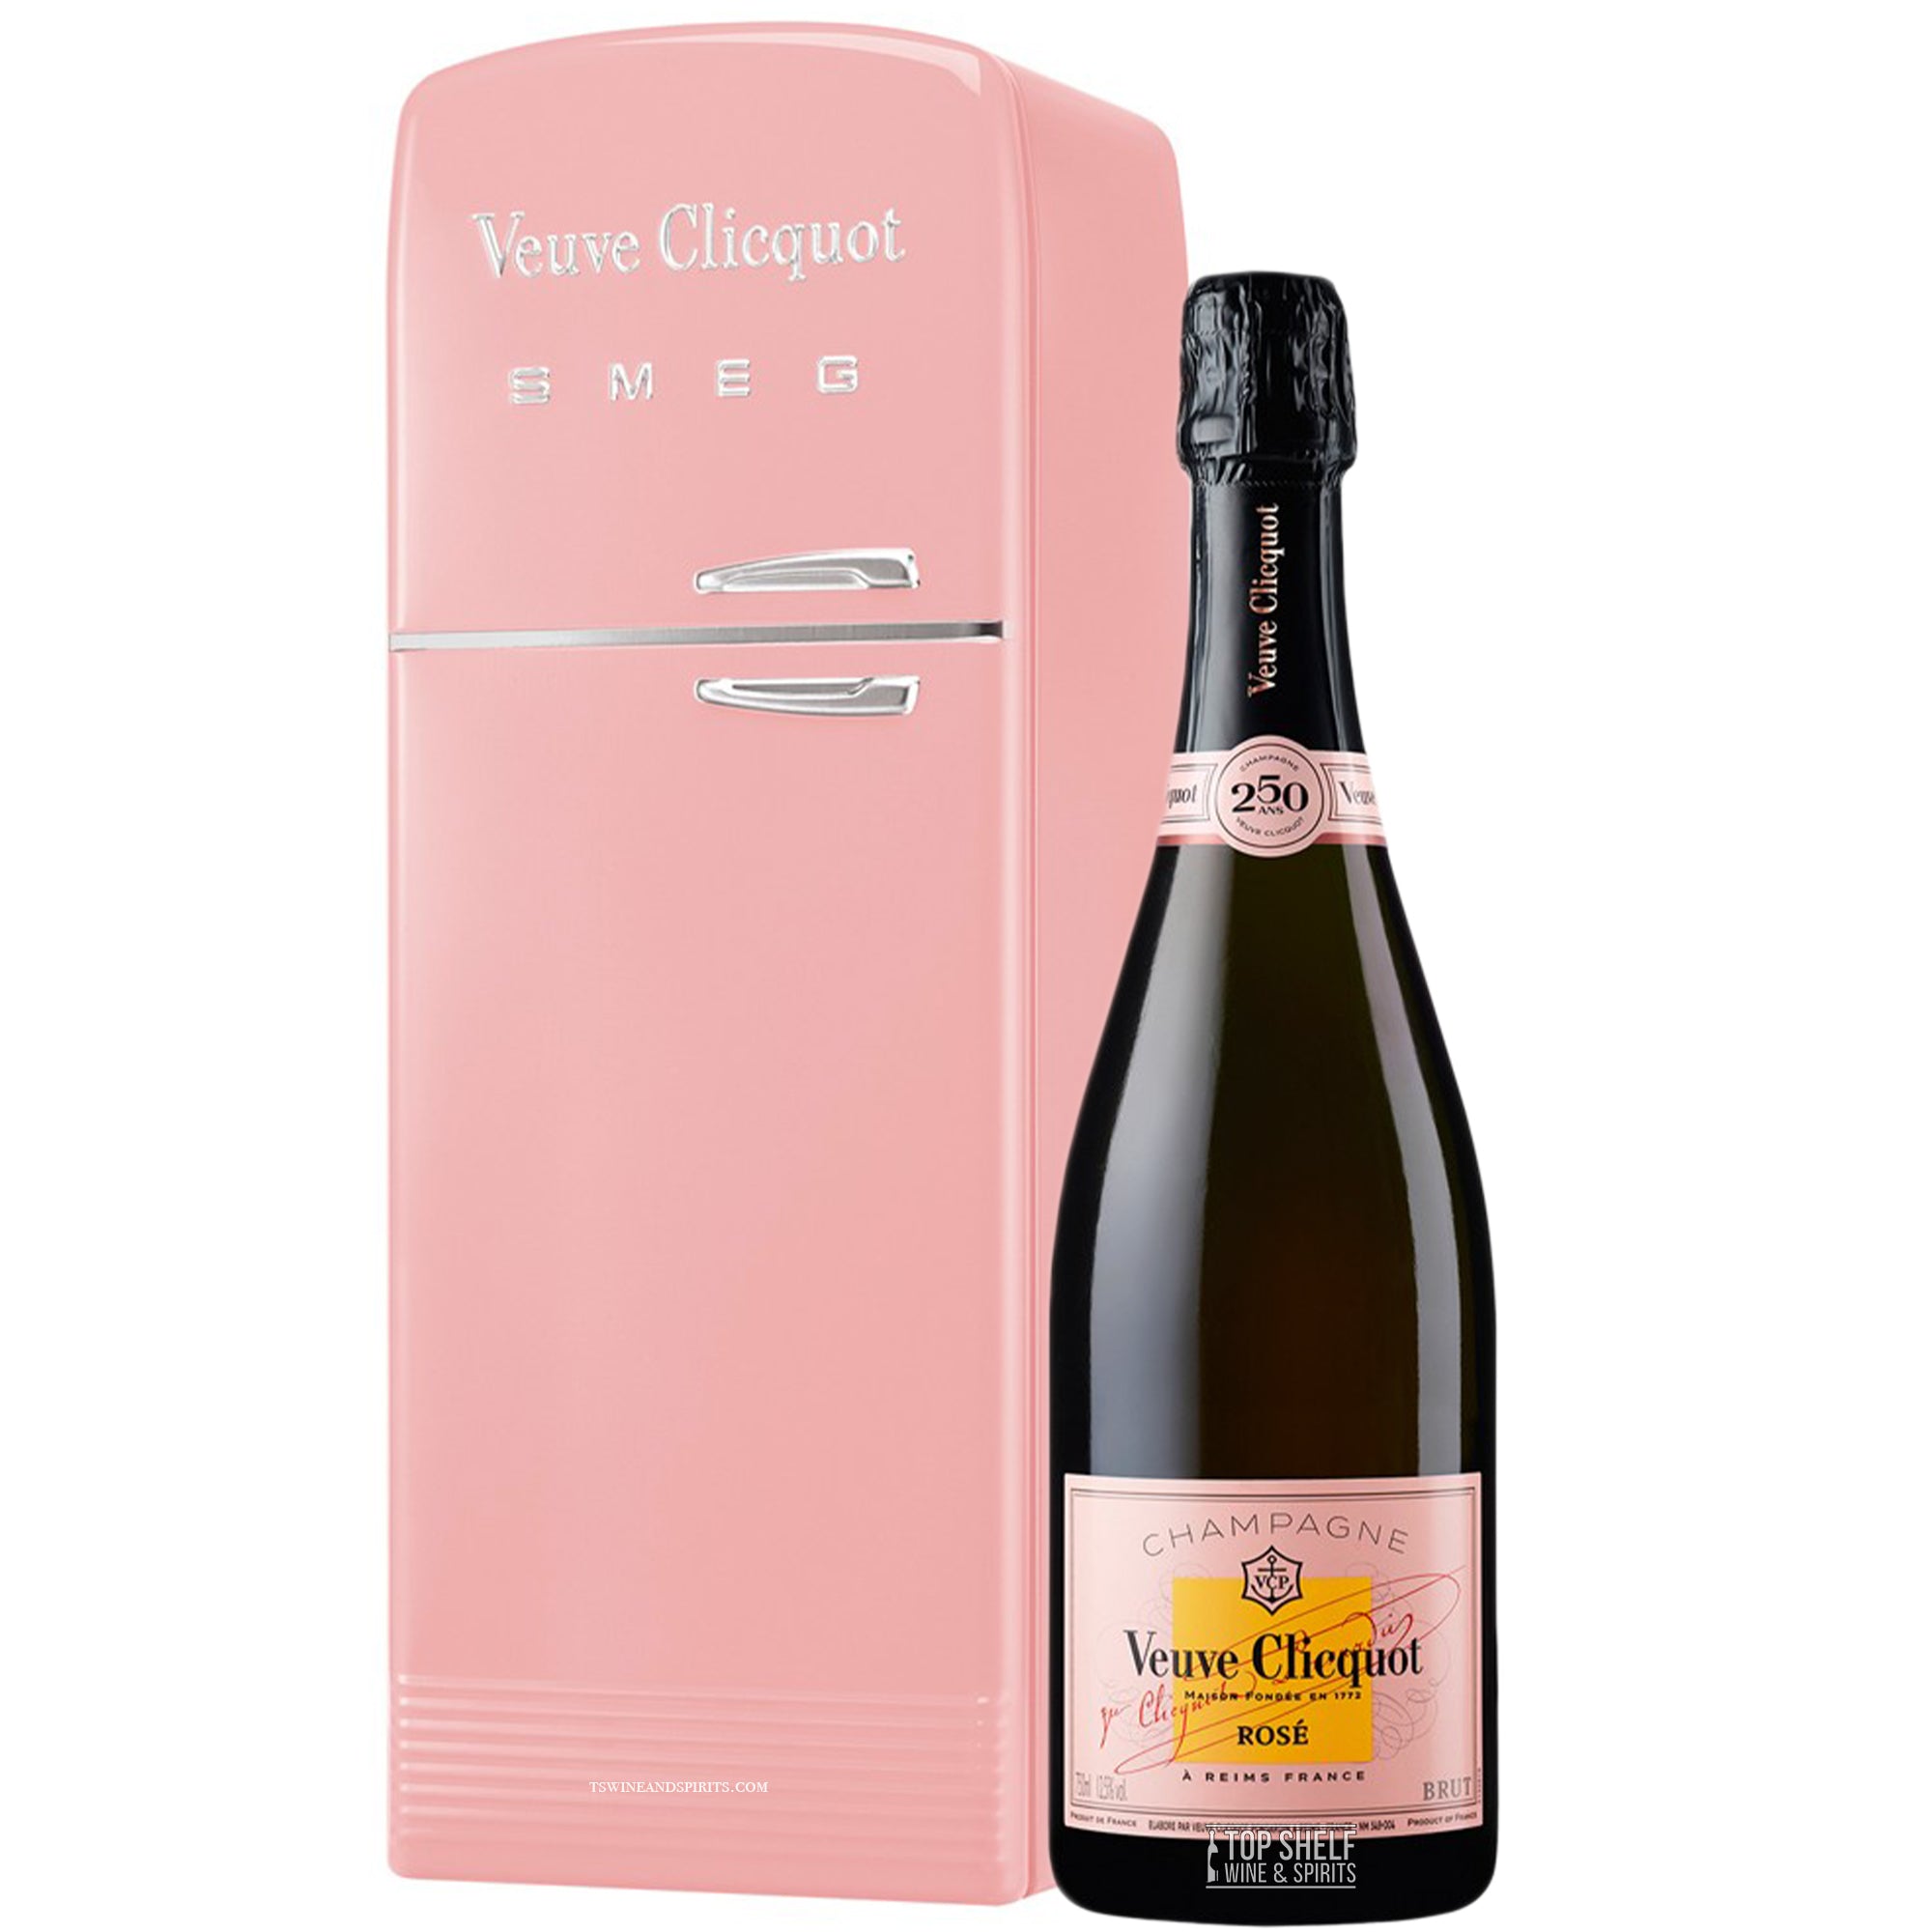 Smeg Has Collaborated With Veuve Clicquot on a Limited-Edition